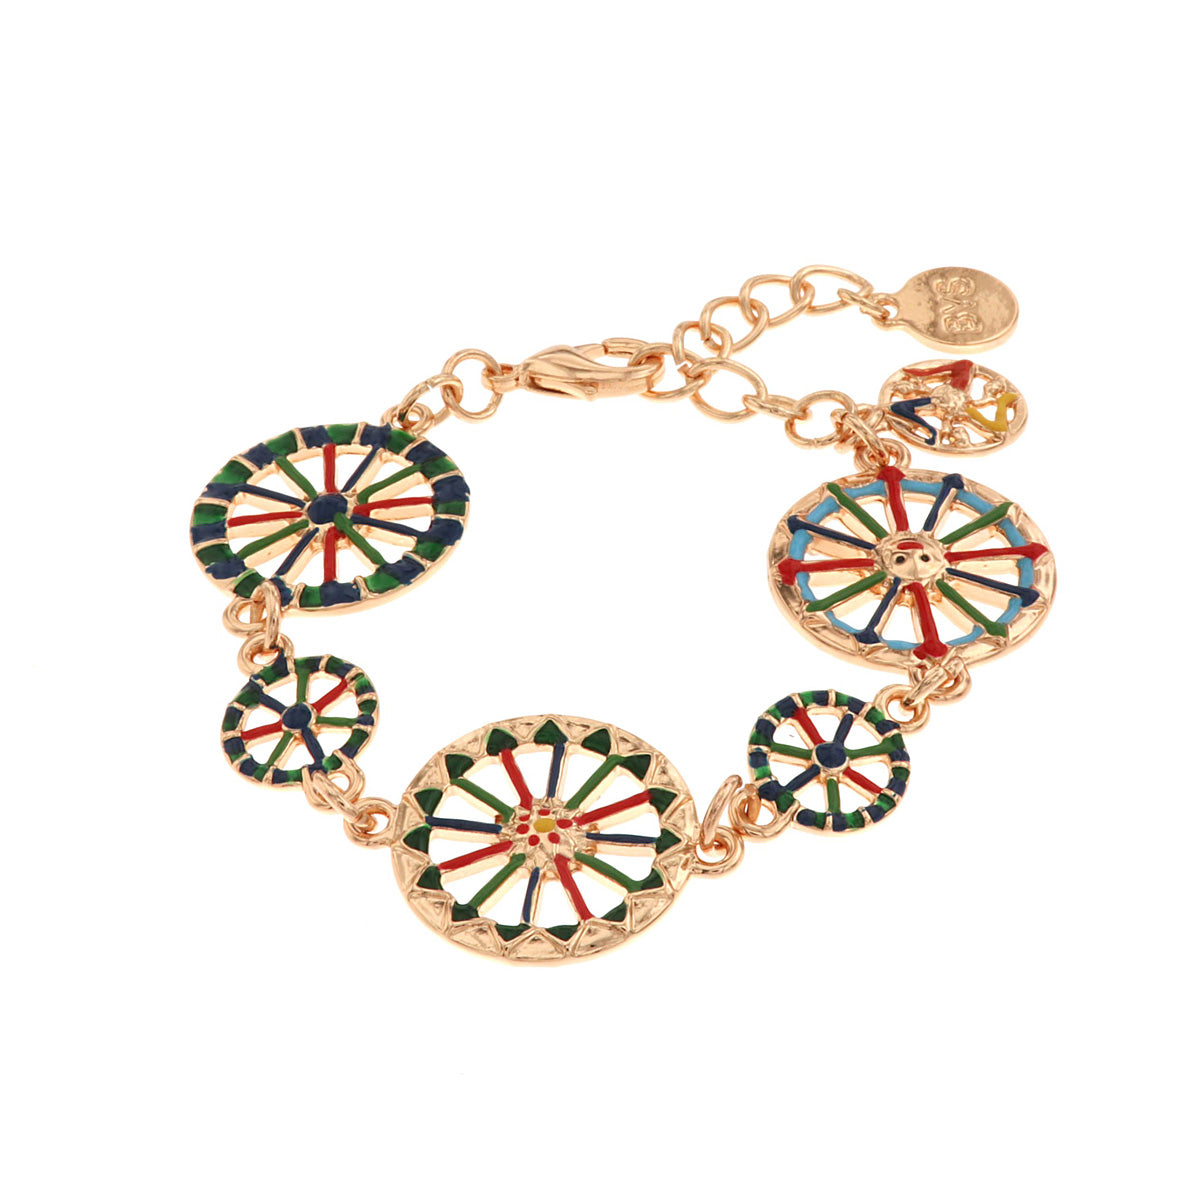 Metal bracelet with wheels of the Sicilian cart embellished with colored glazes